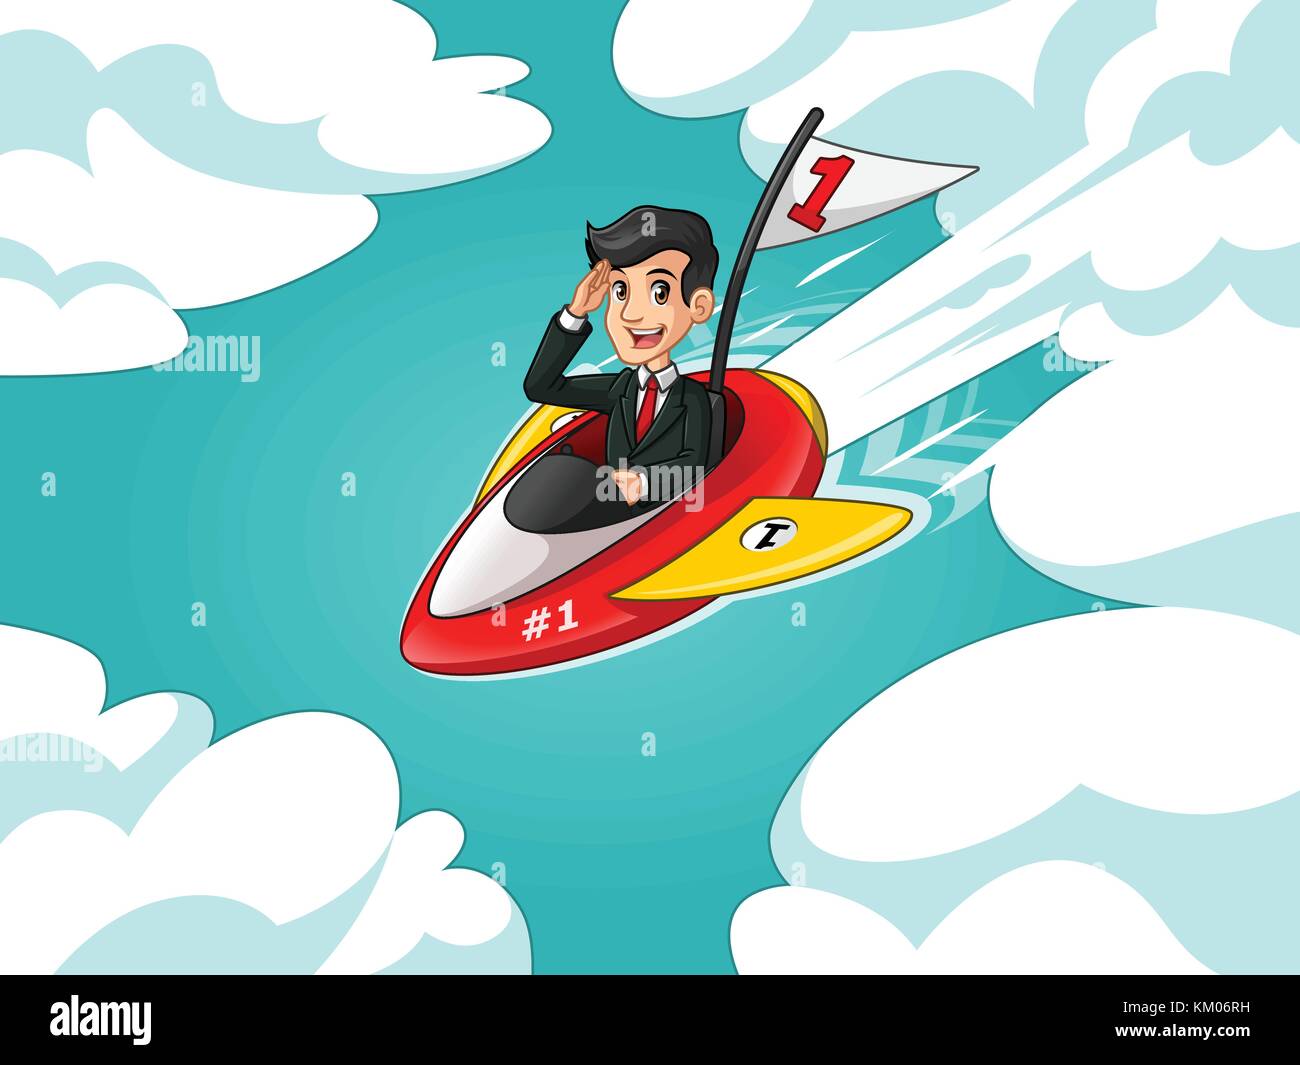 Businessman in black suit cartoon character design riding a rocket with number one flag flying through the sky, against tosca background. Stock Vector